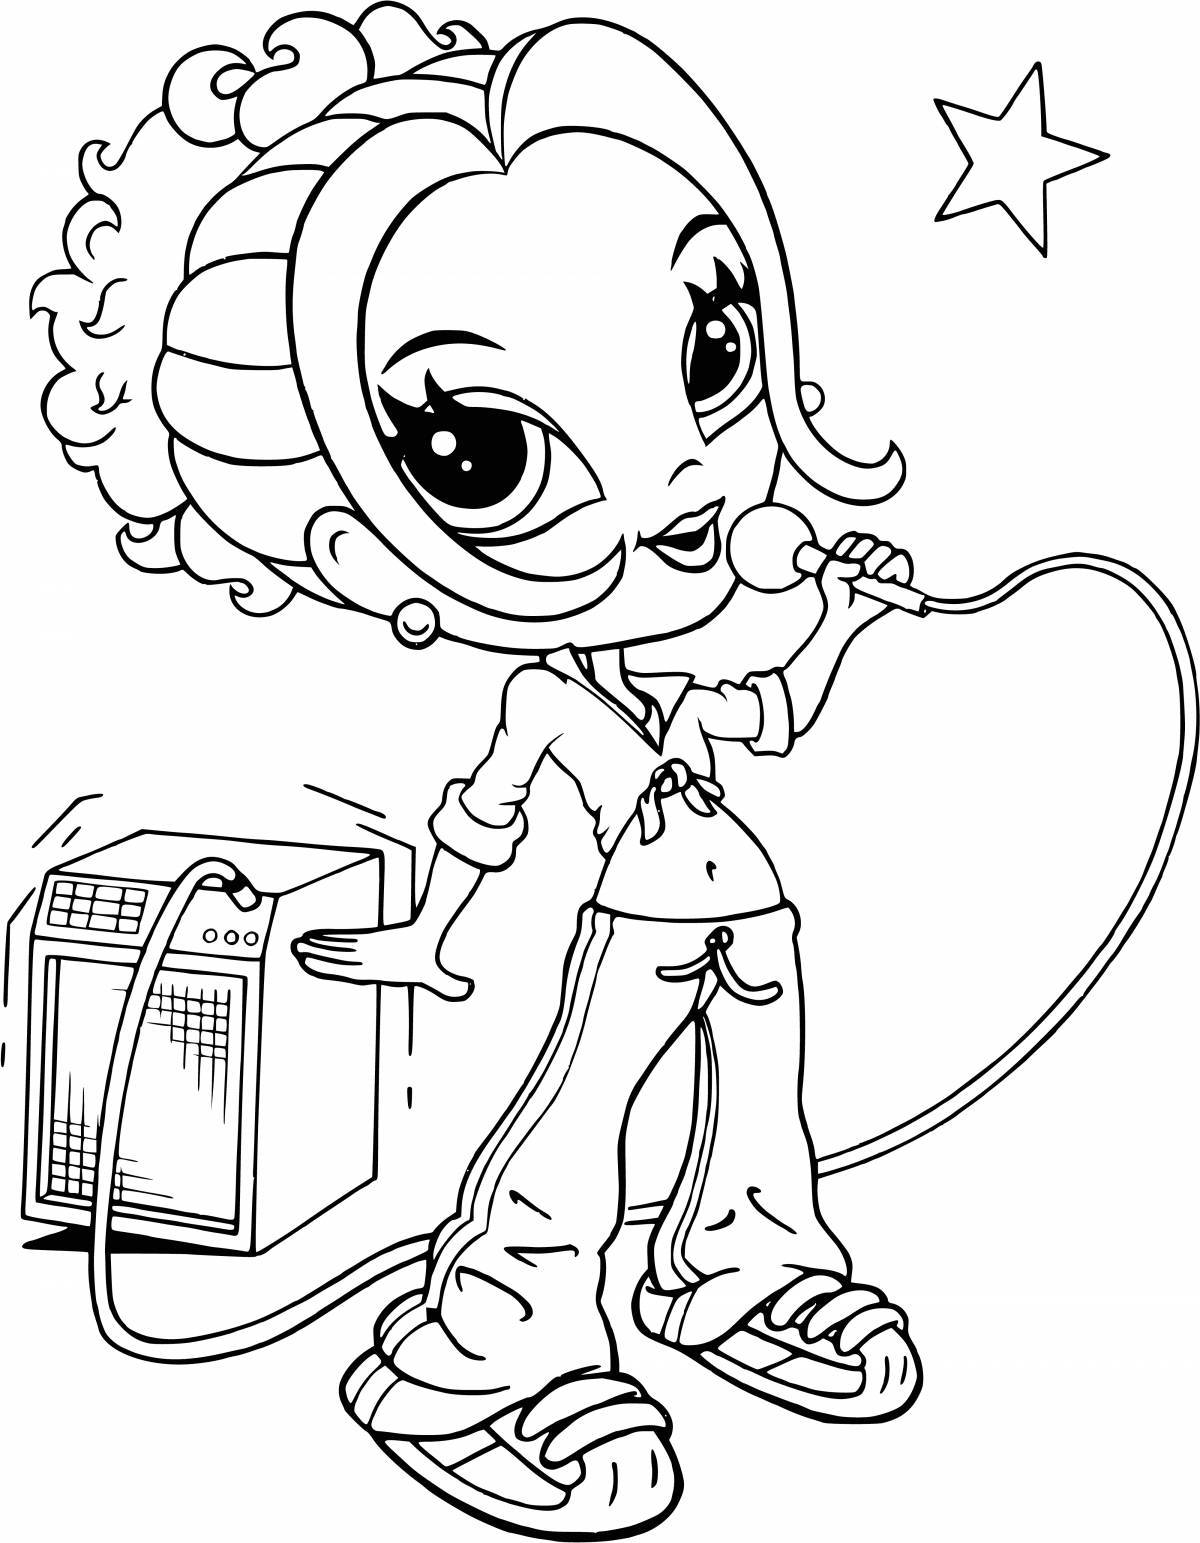 Fabulous coloring page for girls